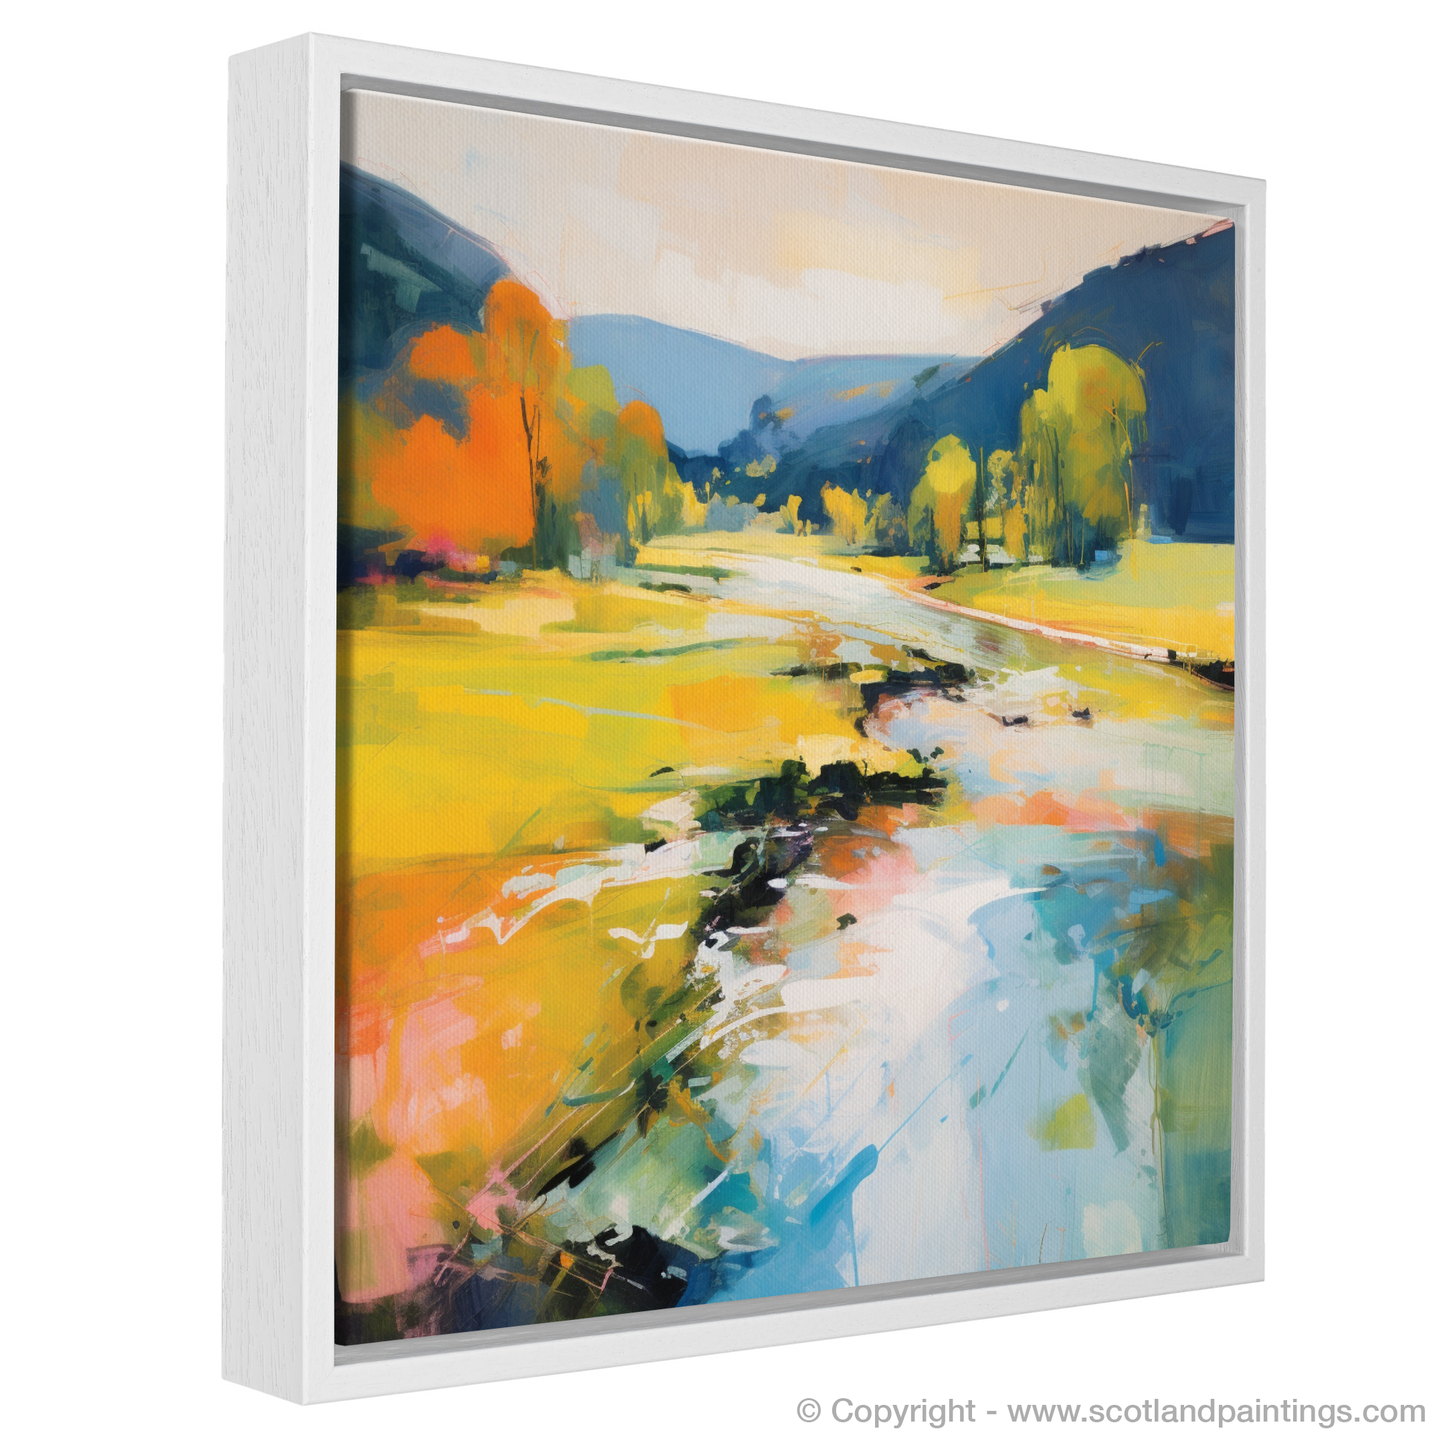 Painting and Art Print of River Earn, Perthshire in summer entitled "Summer Rhapsody by River Earn".